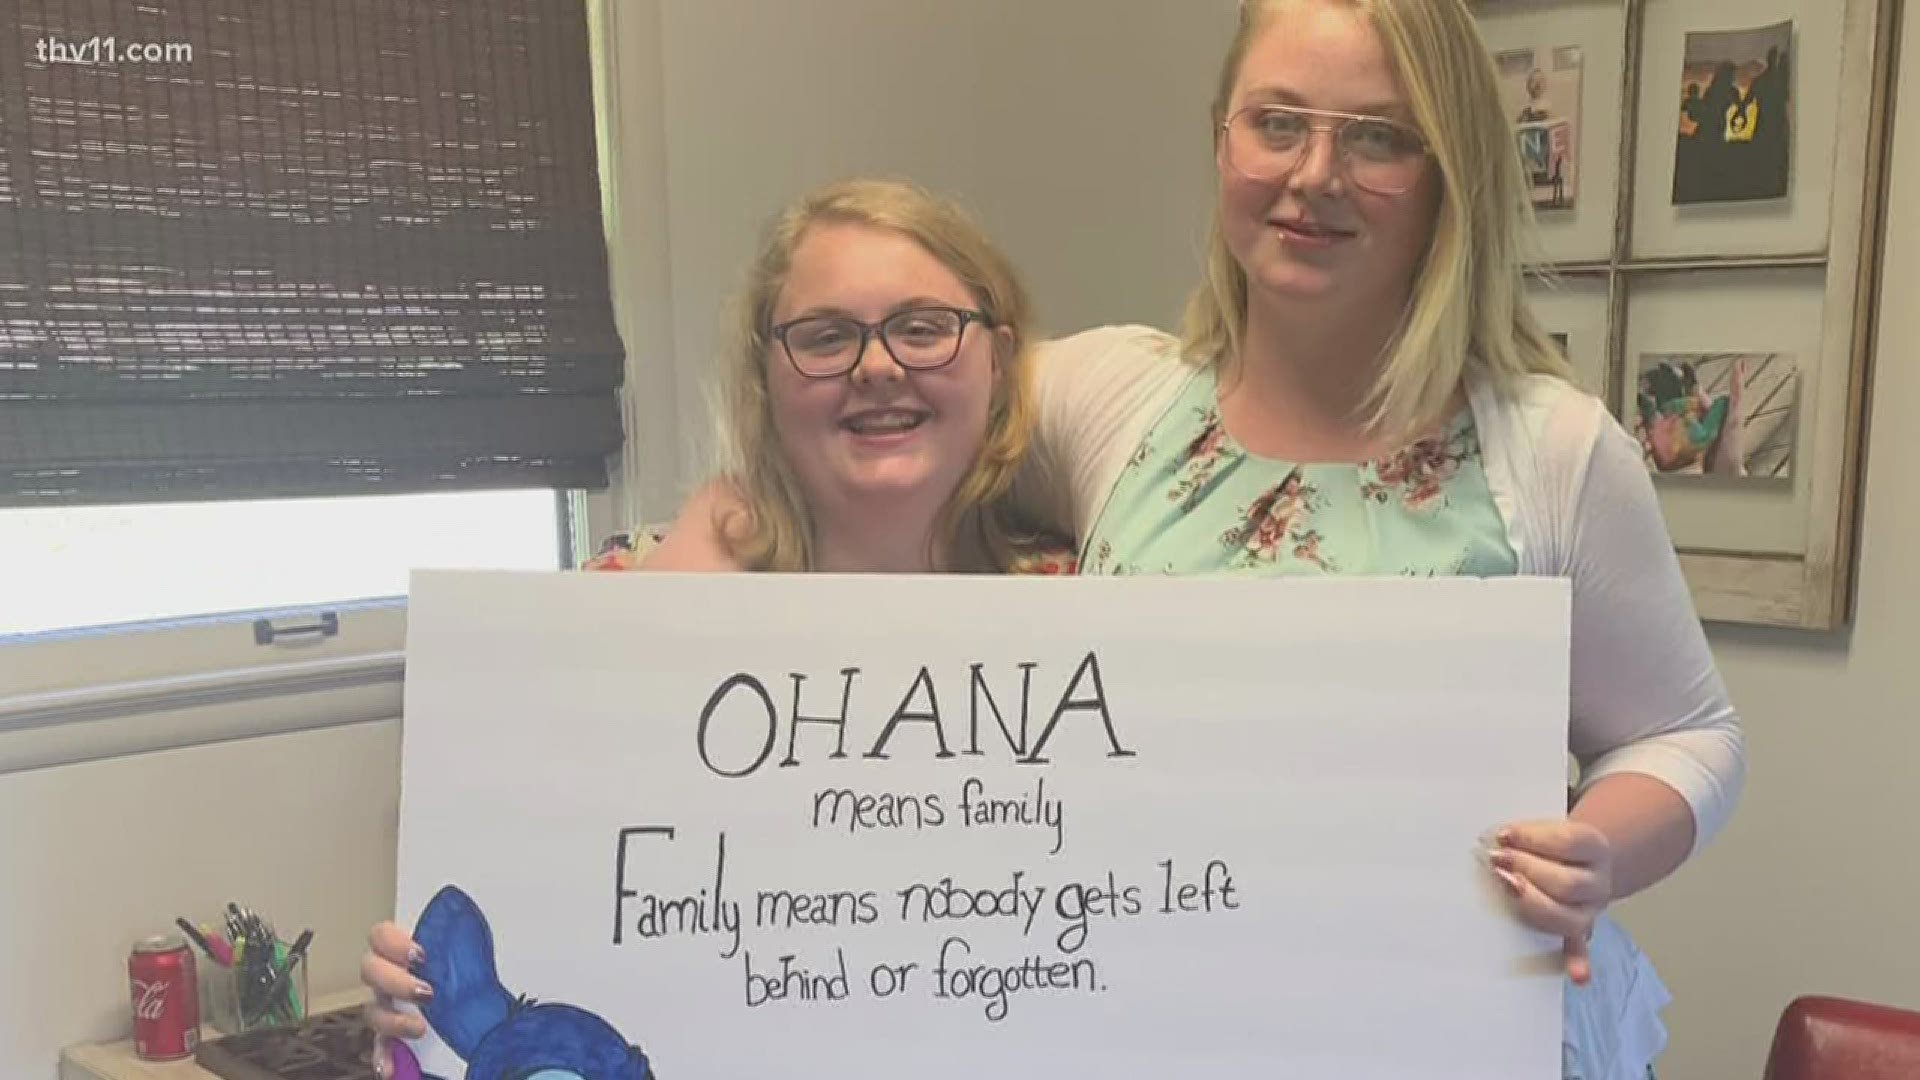 On the day 16-year-old twins McKenzie and Brianna's adoption was to be finalized by a judge, the world was shut down by the COVID-19 pandemic.